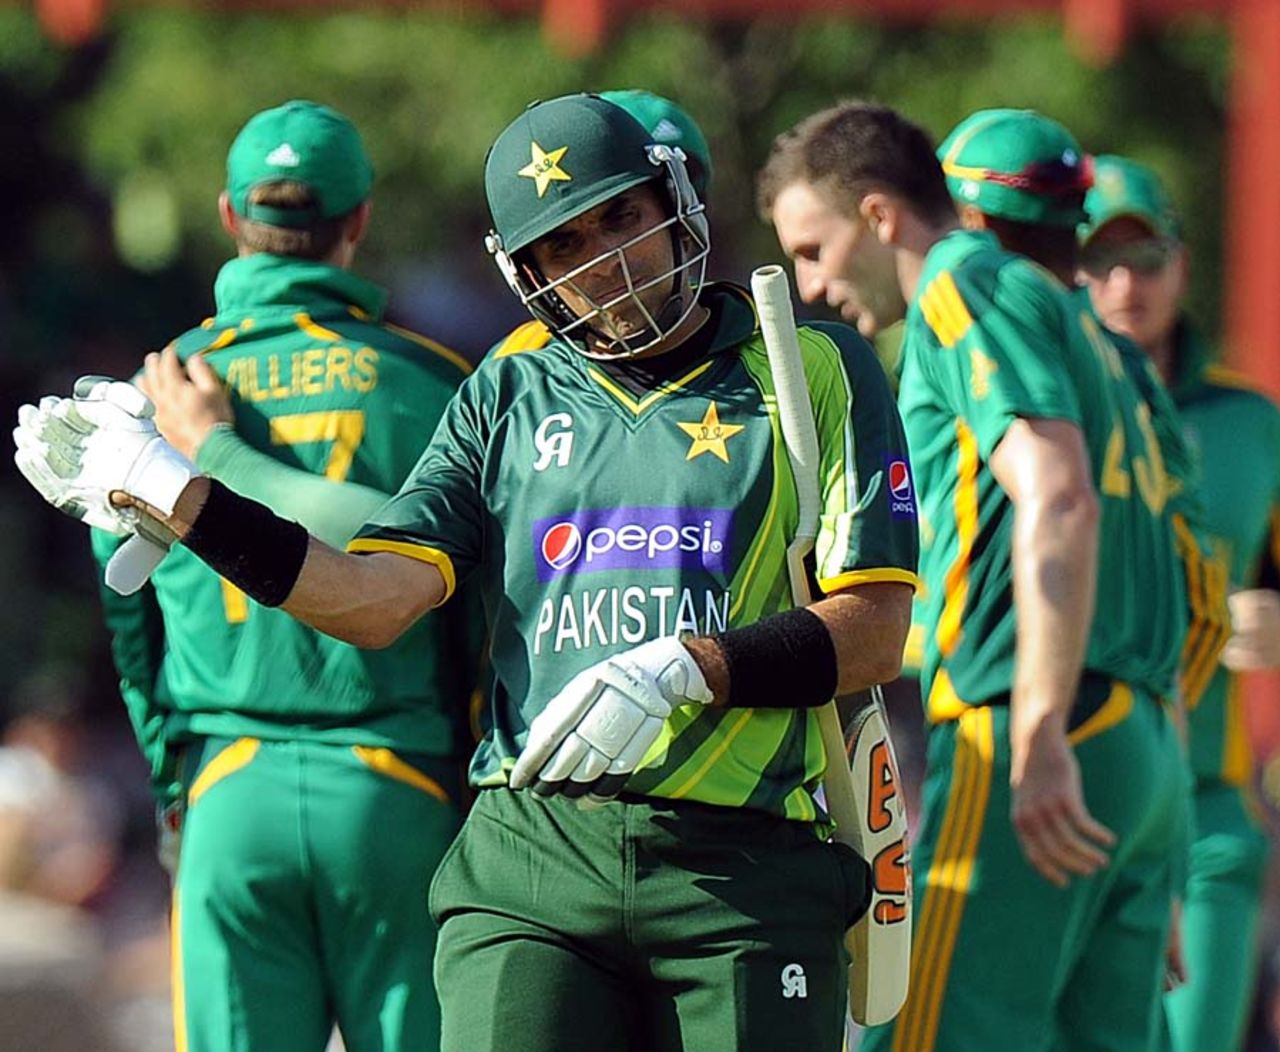 Misbah-ul-Haq practices a virtual shot after being dismissed, South Africa v Pakistan, 1st ODI, Bloemfontein, March 10, 2013